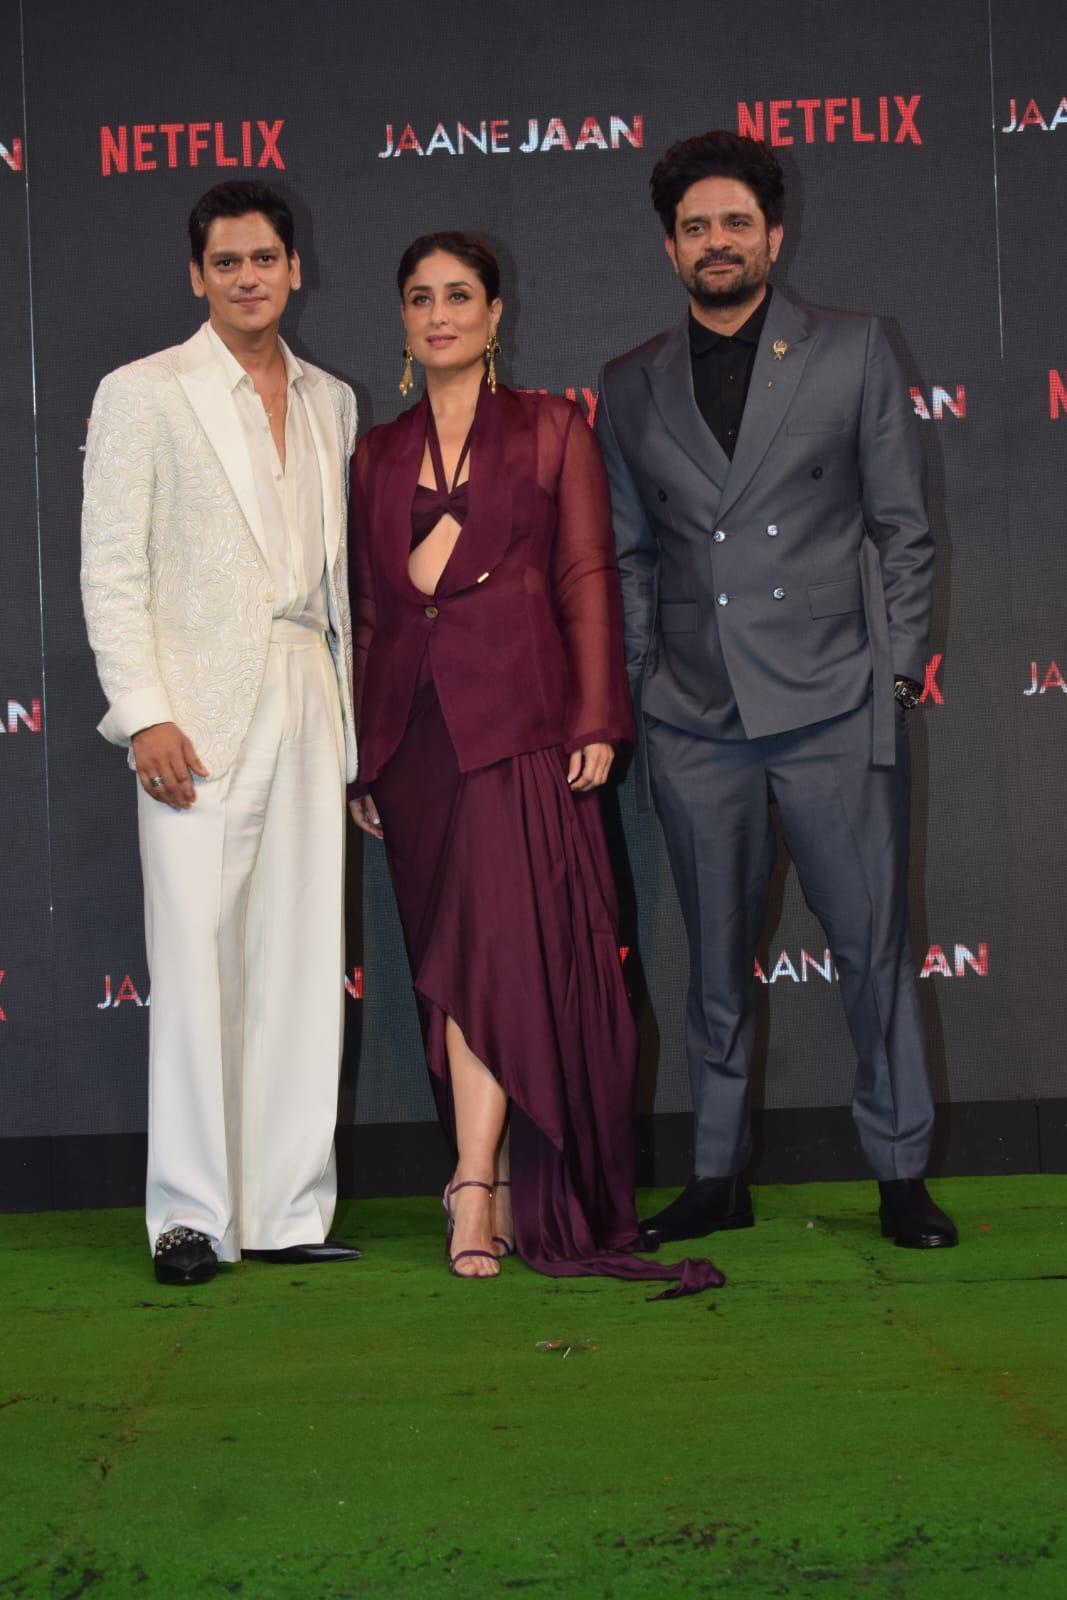 Maya (Kareena Kapoor Khan), Naren (Jaideep Ahlawat) and Karan (Vijay Varma) navigate through a web of emotions and unforeseen circumstances as they cover up and uncover clues in a bid to outwit each other.